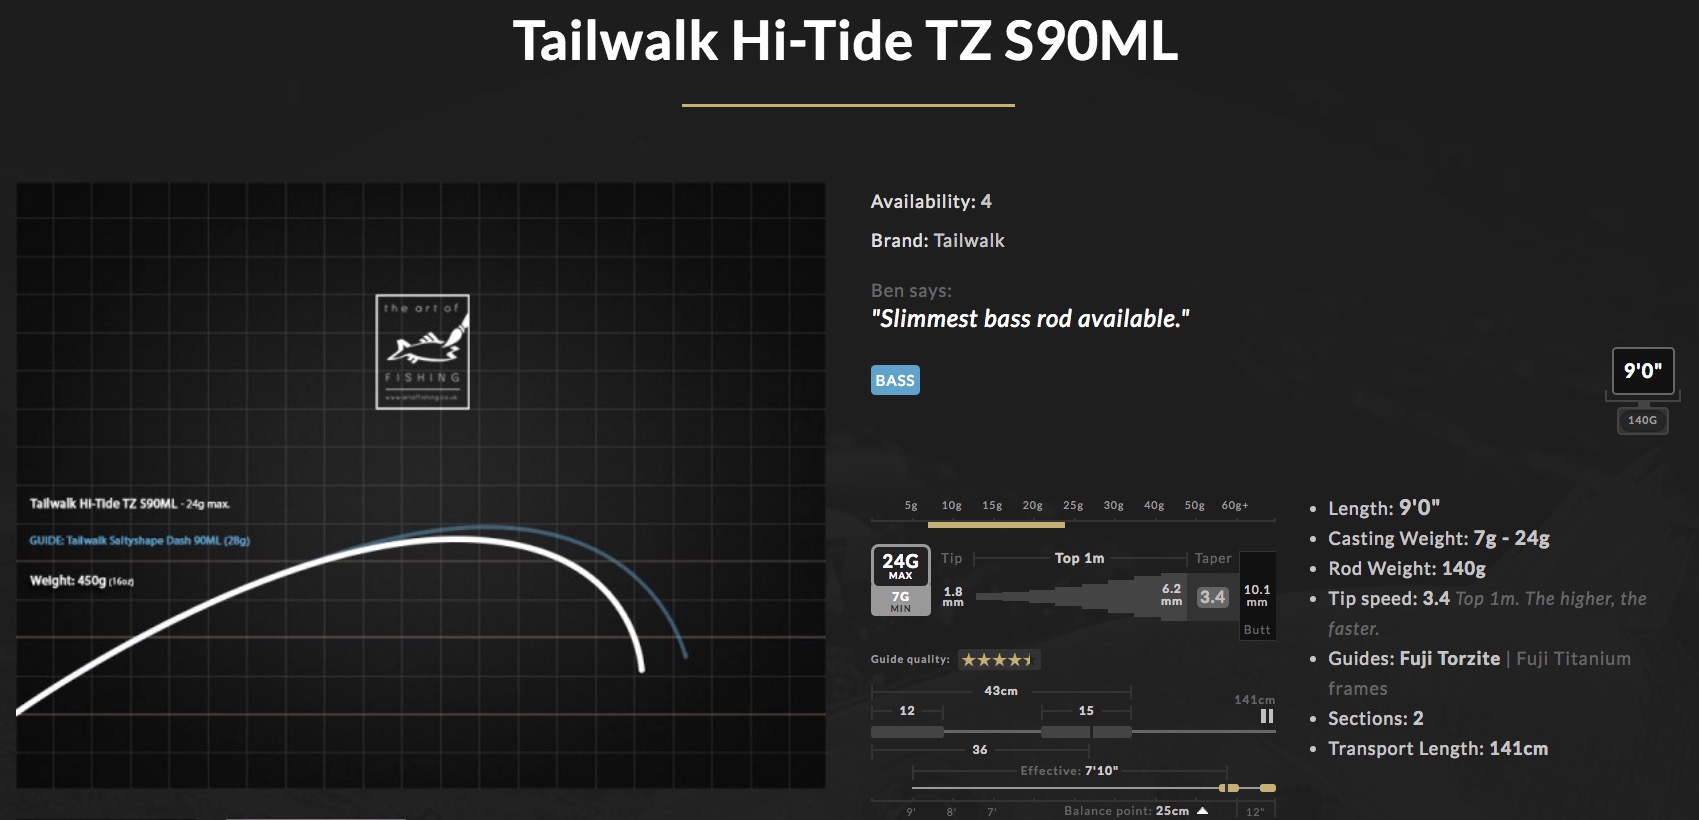 Tailwalk Hi-Tide TZ S90ML 9' 7-24g lure rod review - not remotely